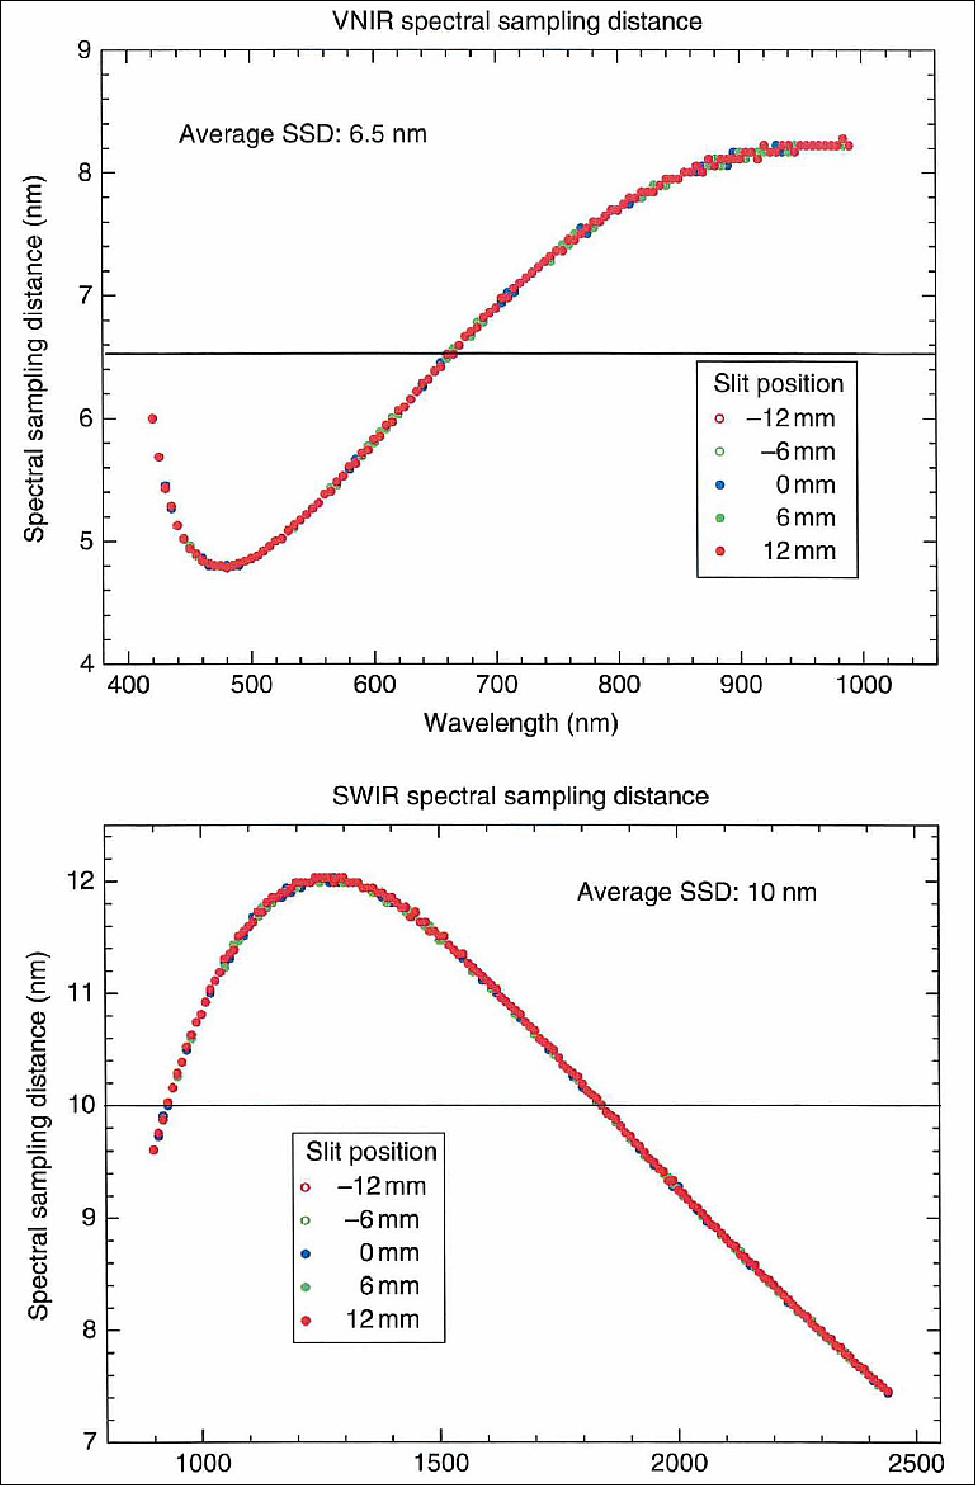 Figure 23: Spectral sampling distances for the VNIR (top) and SWIR spectral bands (bottom) as a function of wavelength. Tue curves depict the difference in center wavelengths for adjoining spectral bands. Tue nonlinear behavior is due to the dispersion characteristics of the glasses used for the prisms and their combination (image credit: OHB)